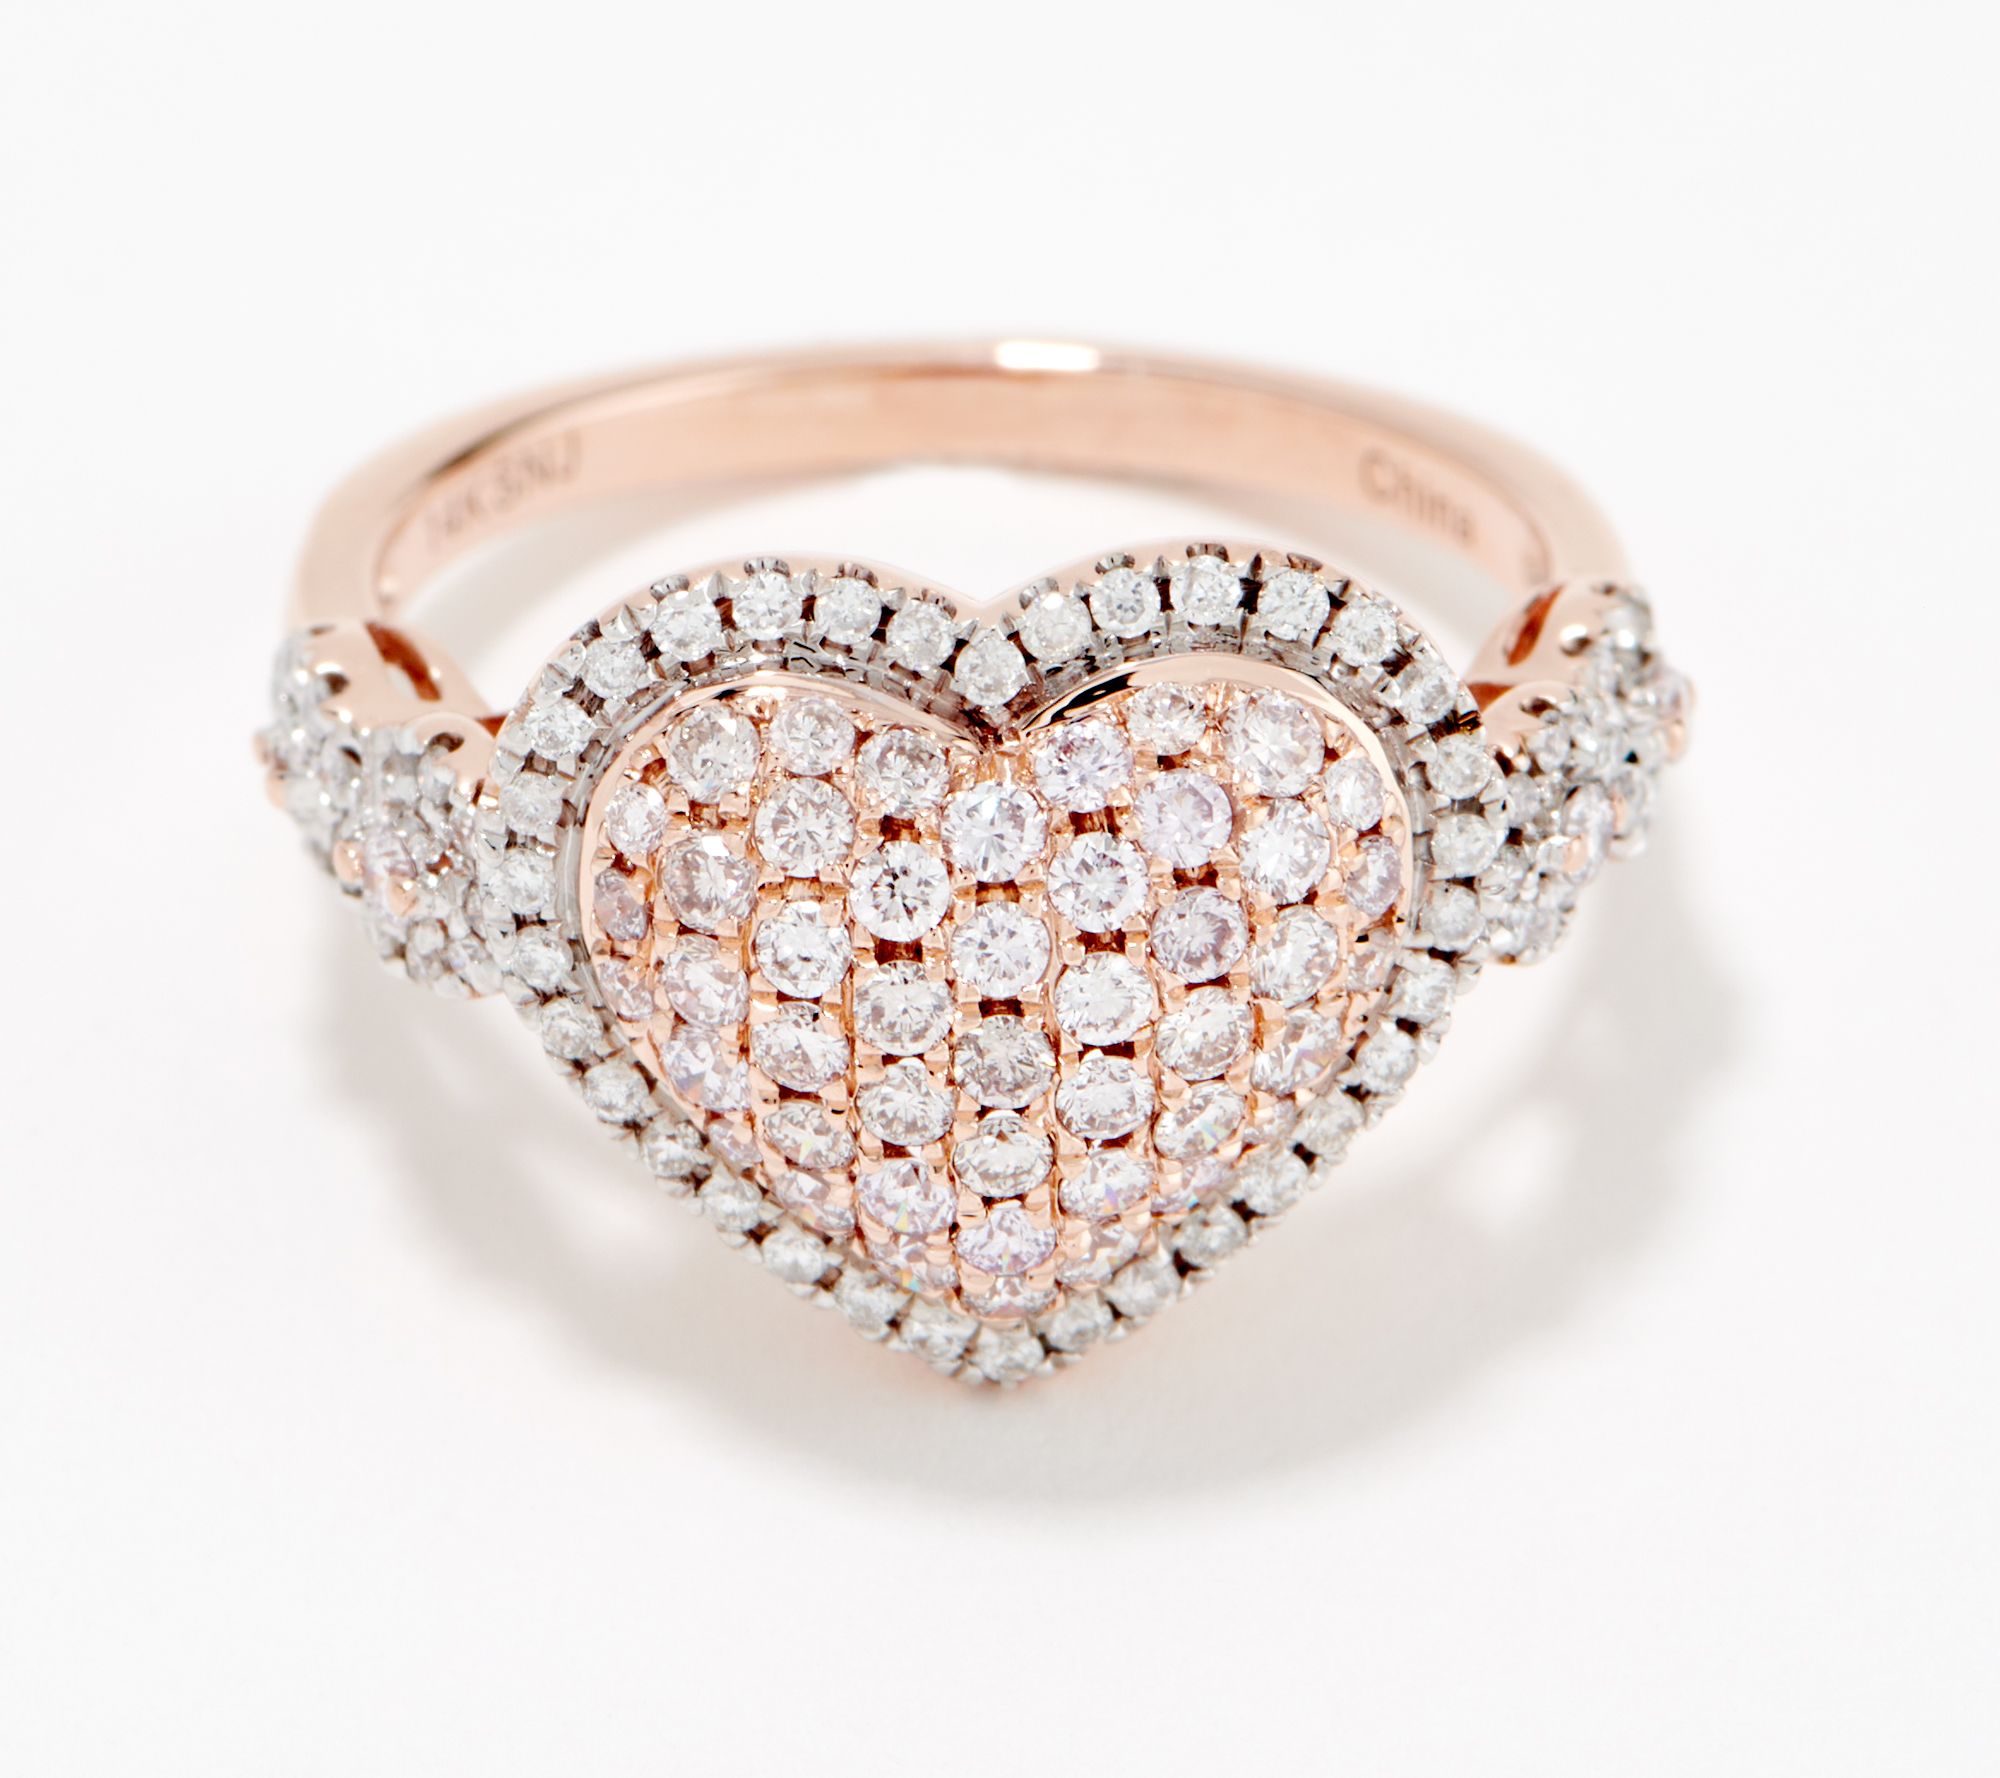 Pink gold engagement ring with heart-shaped diamond